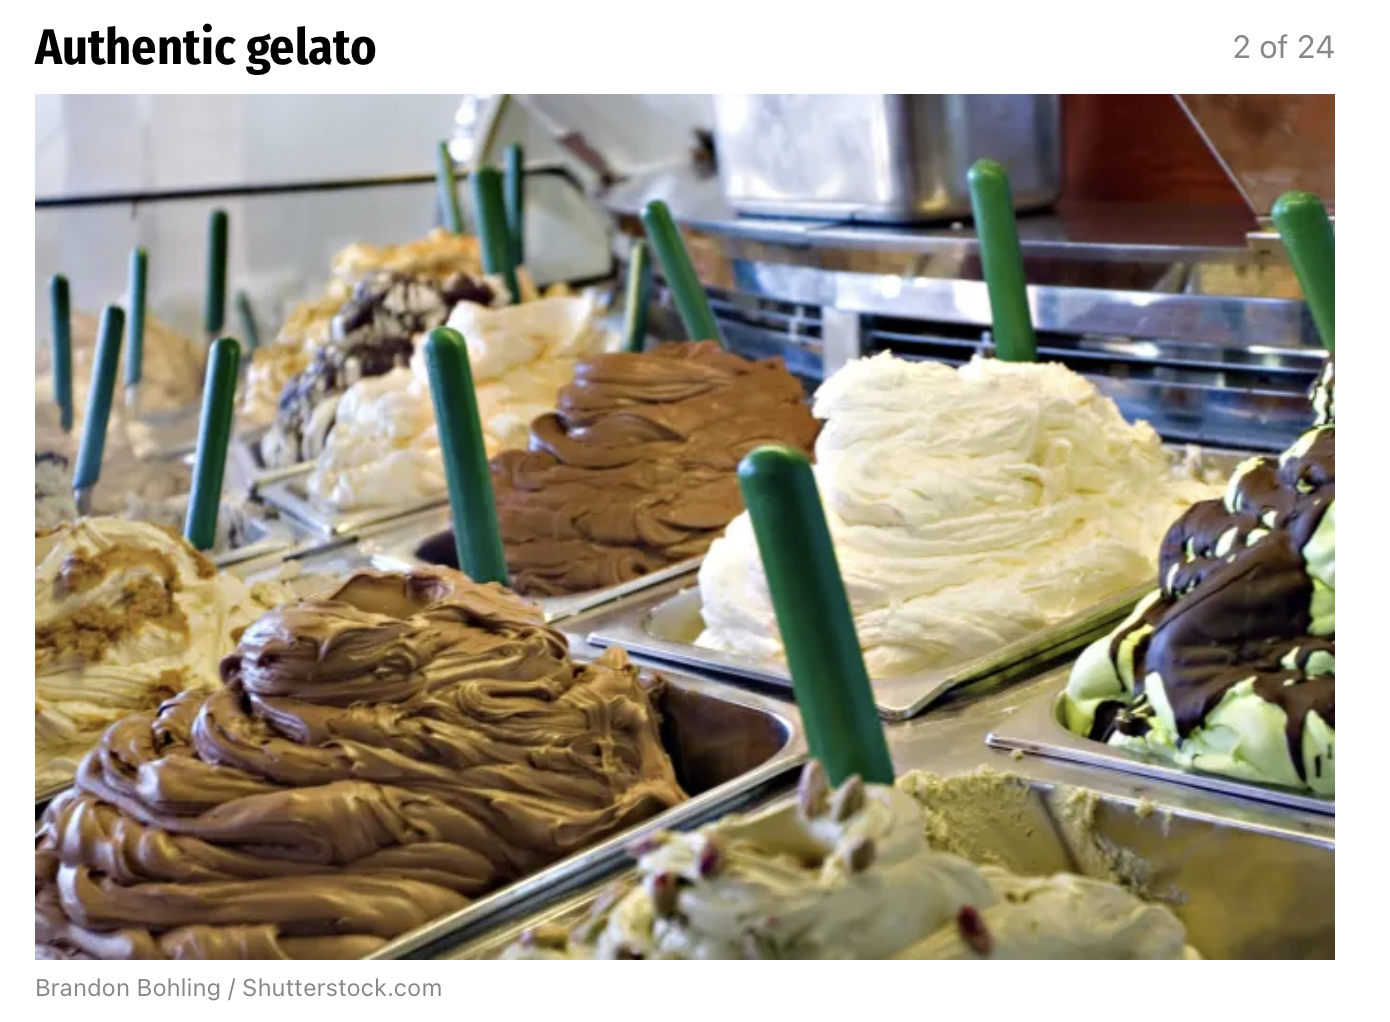 photo of various tubs of gelato